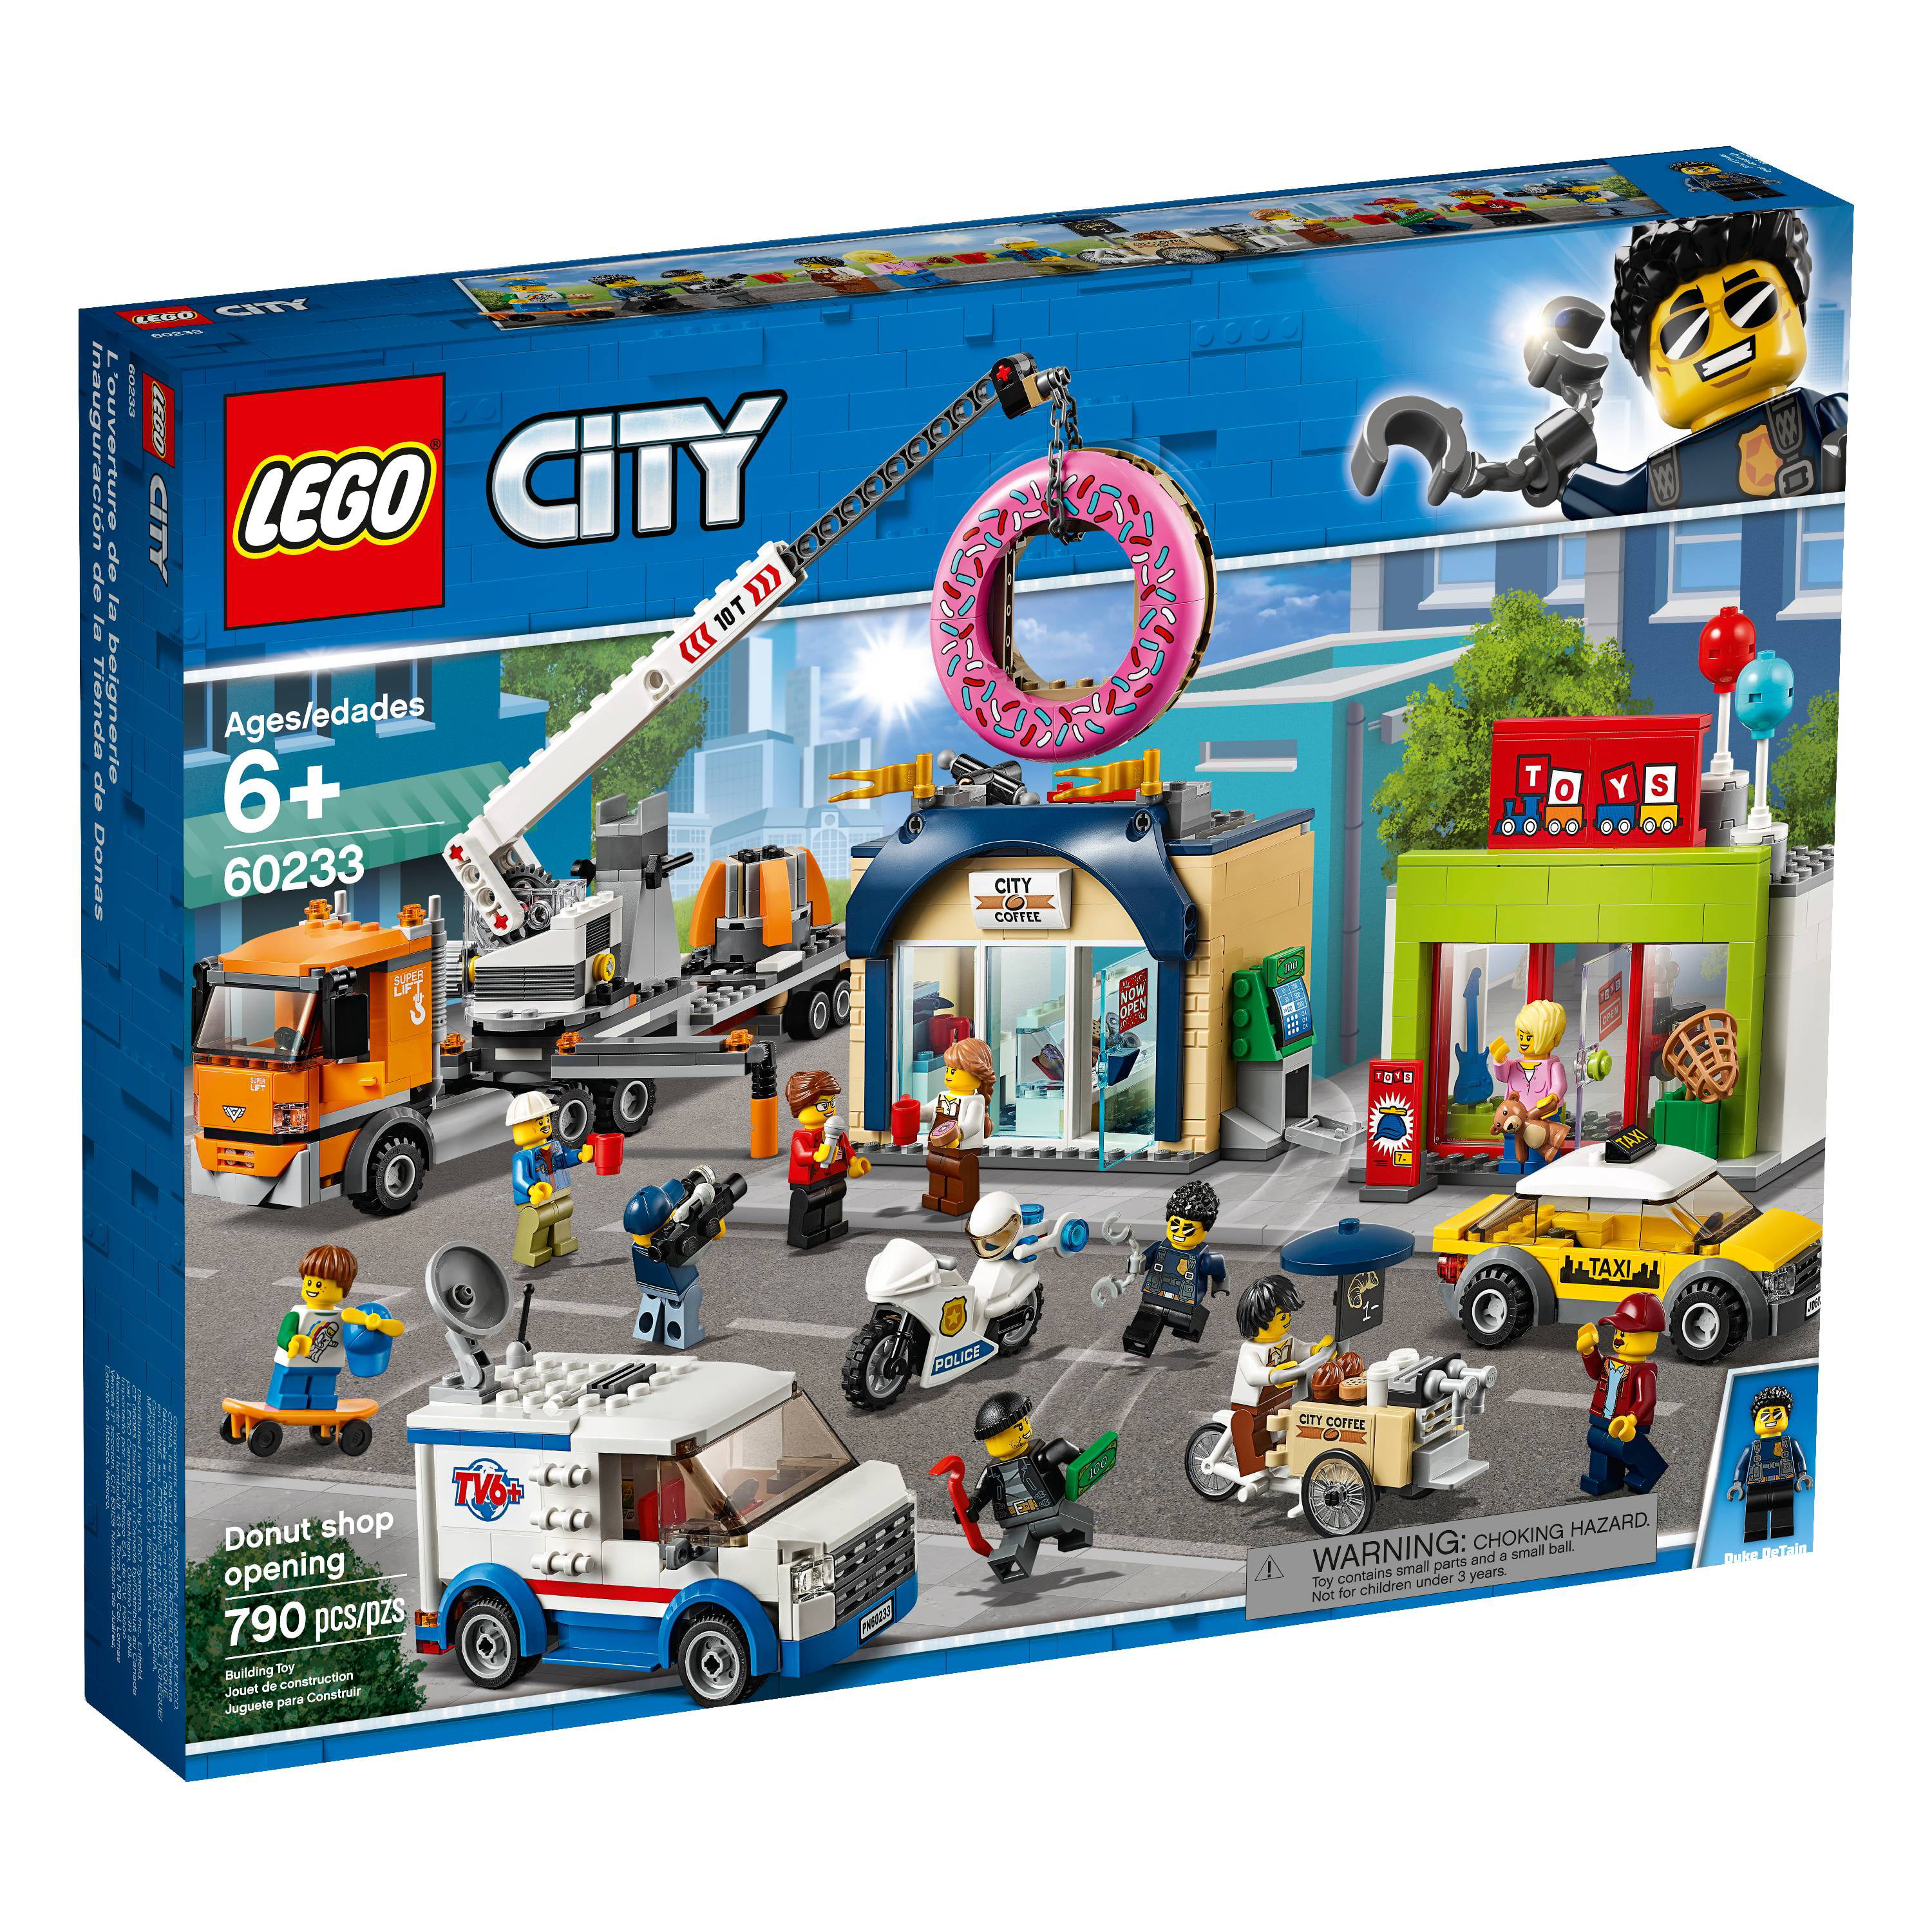 LEGO City Donut Shop Opening 60233 Store with Toy Vehicles Walmart.com